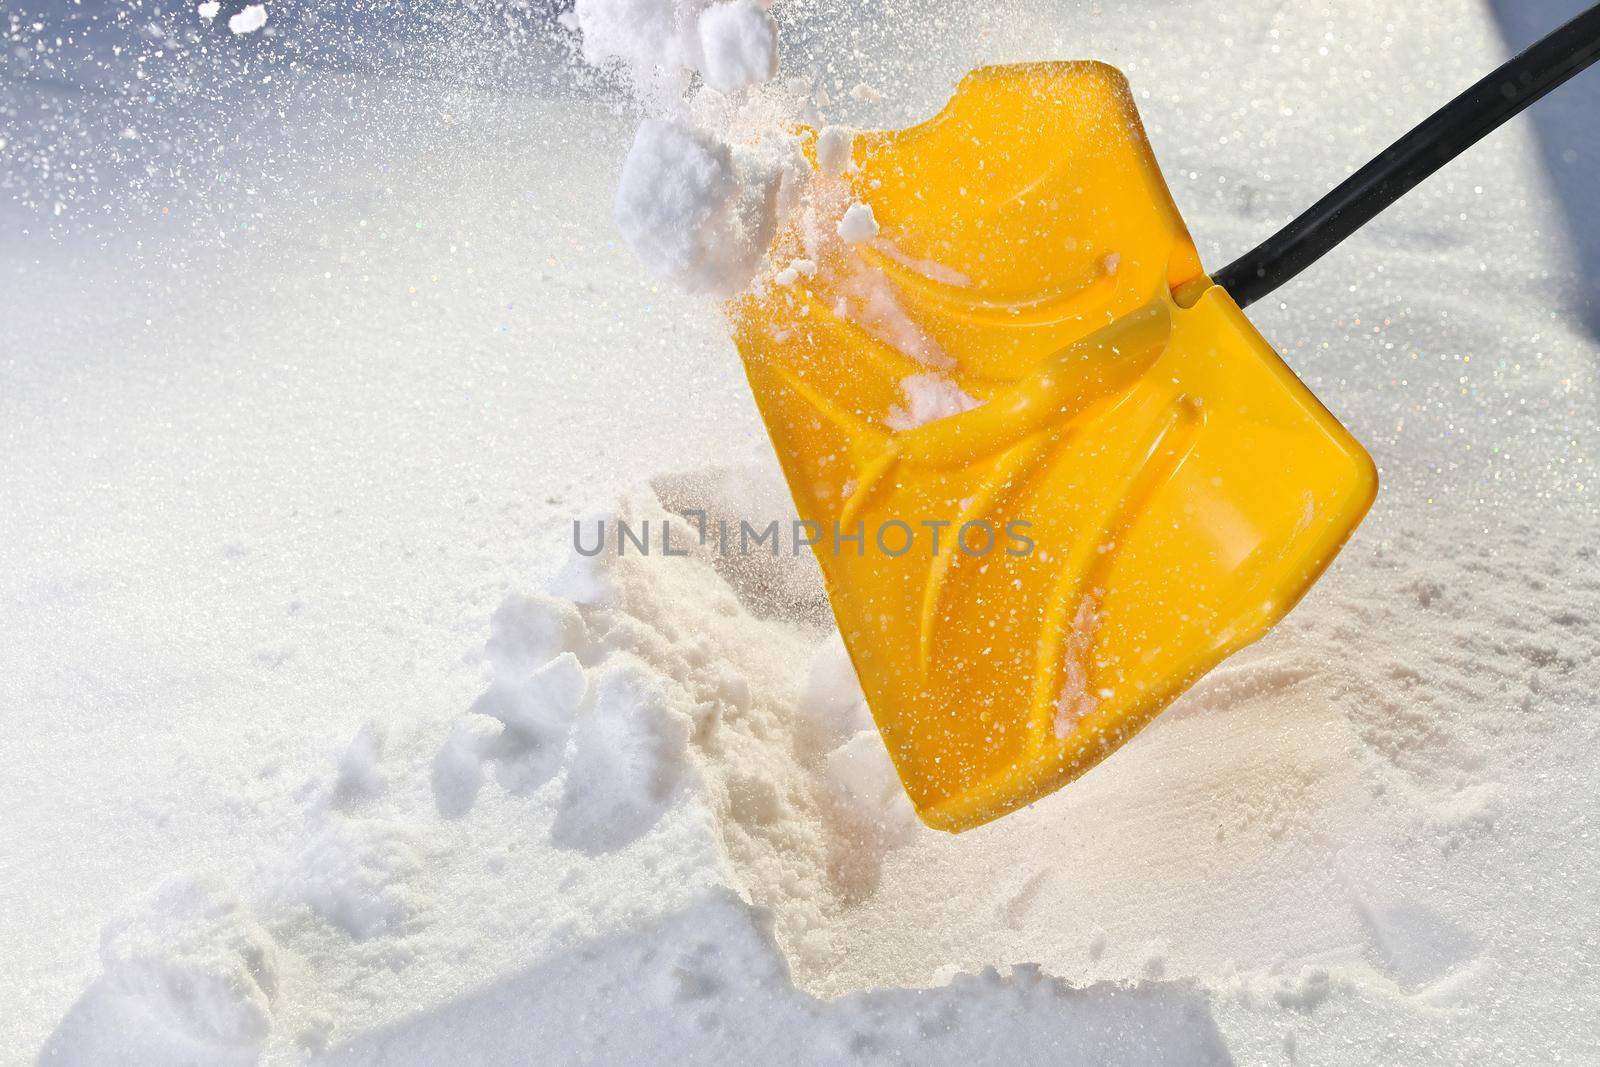 Yellow Snow Shovel Shoveling Fresh, Deep Powdery Snow on a Sunny day to Clear a Path or Driveway. High quality photo